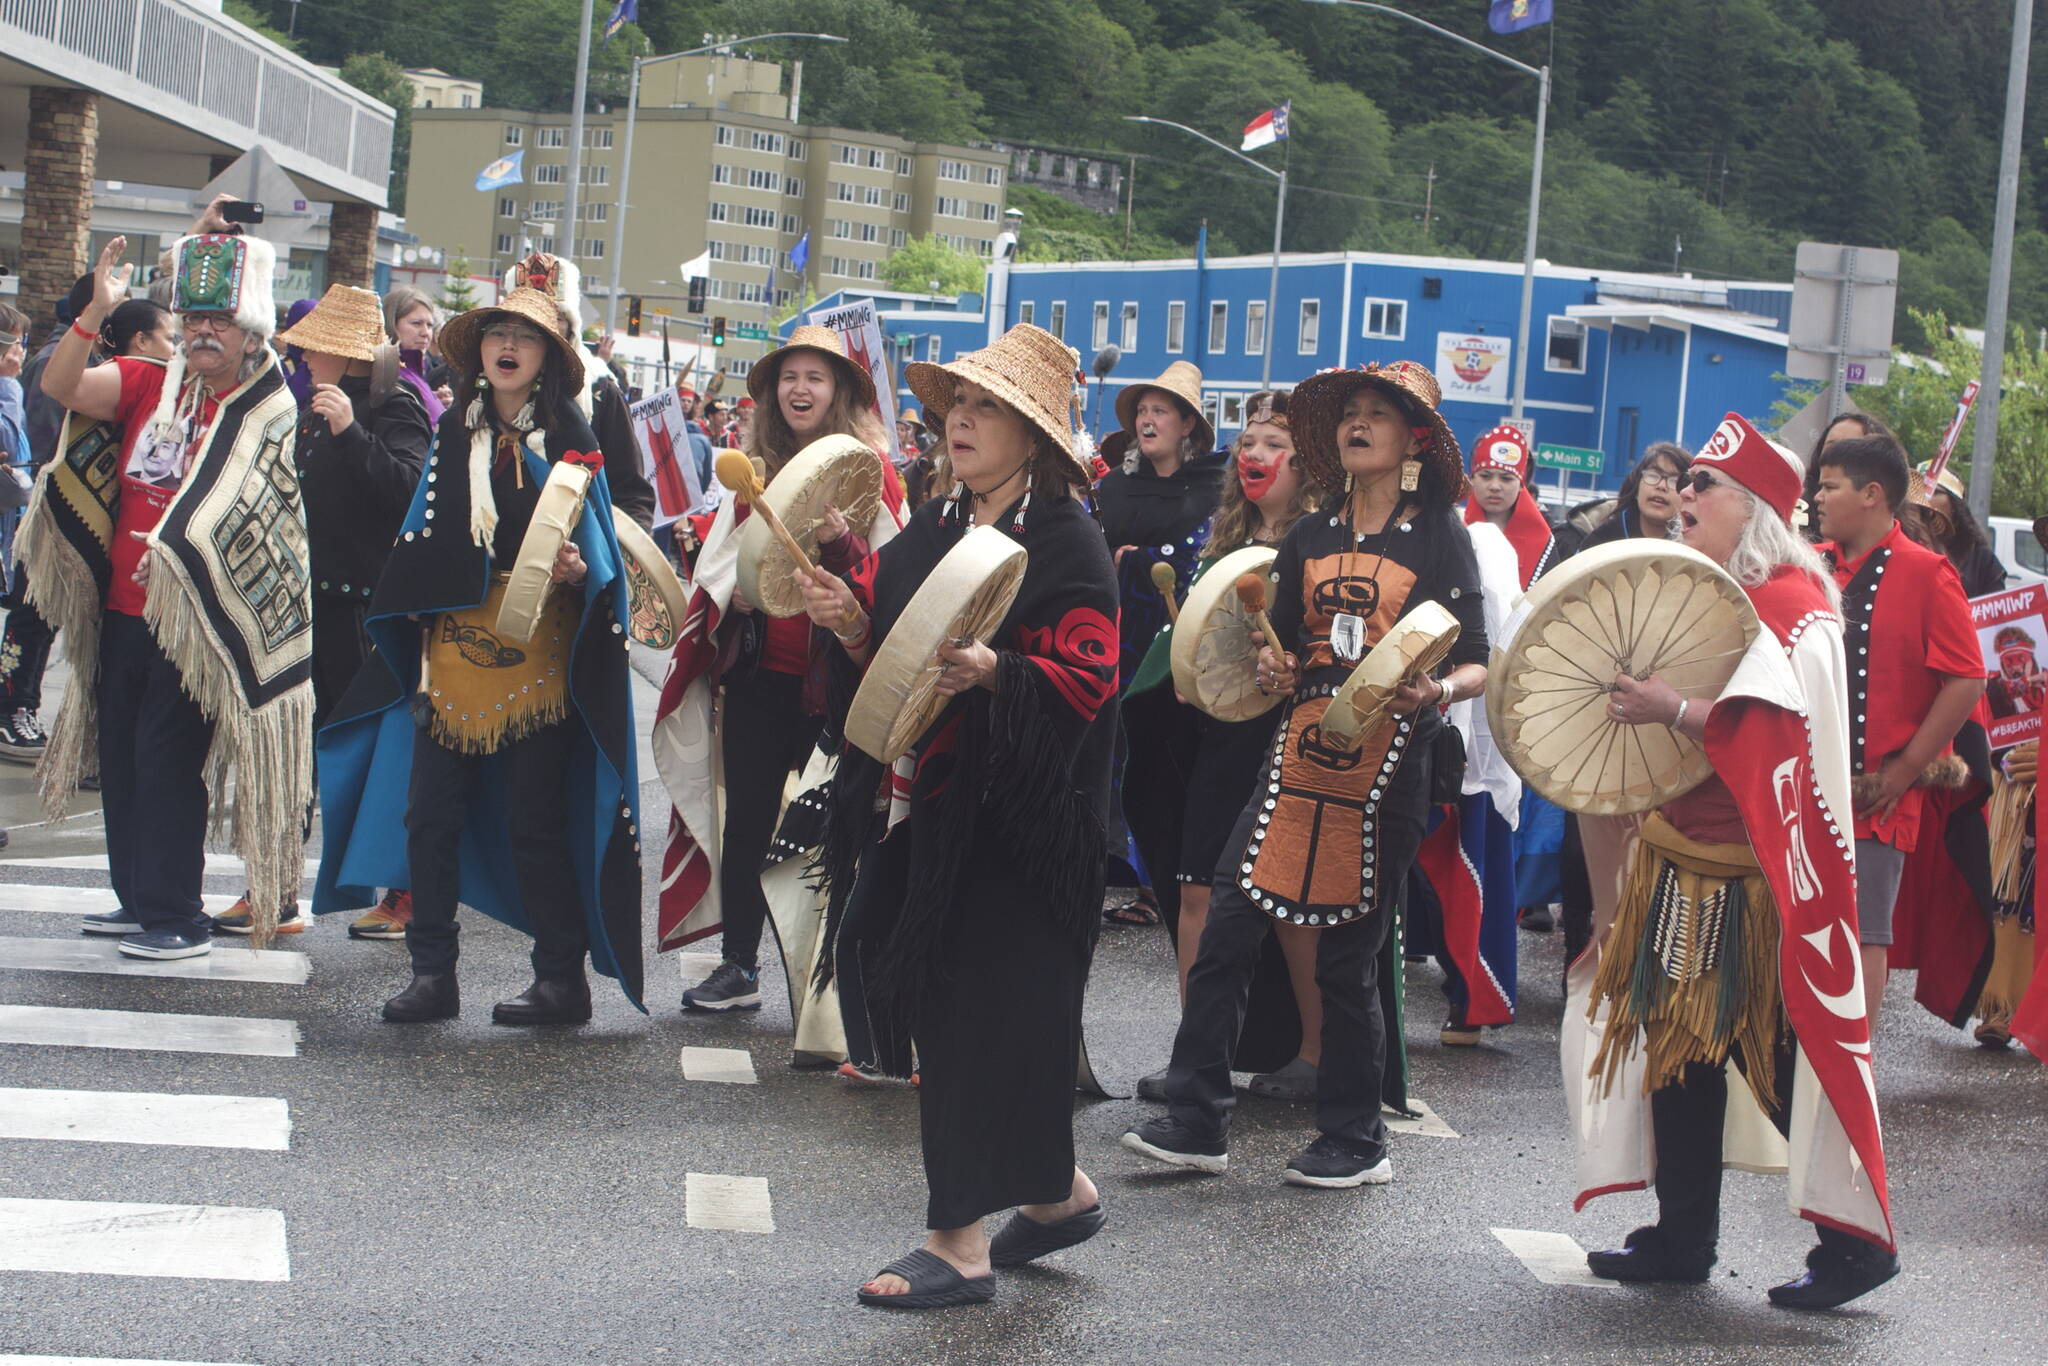 A group of women drummers nears the end of the Celebration parade route at the turnoff to Centennial Hall on Saturday. The four-day Alaska Native gathering is marking its final day with events at the hall including an afternoon of dances, a screening a film commemorating Celebration’s 40-year anniversary and the Grand Exit. (Mark Sabbatini / Juneau Empire)